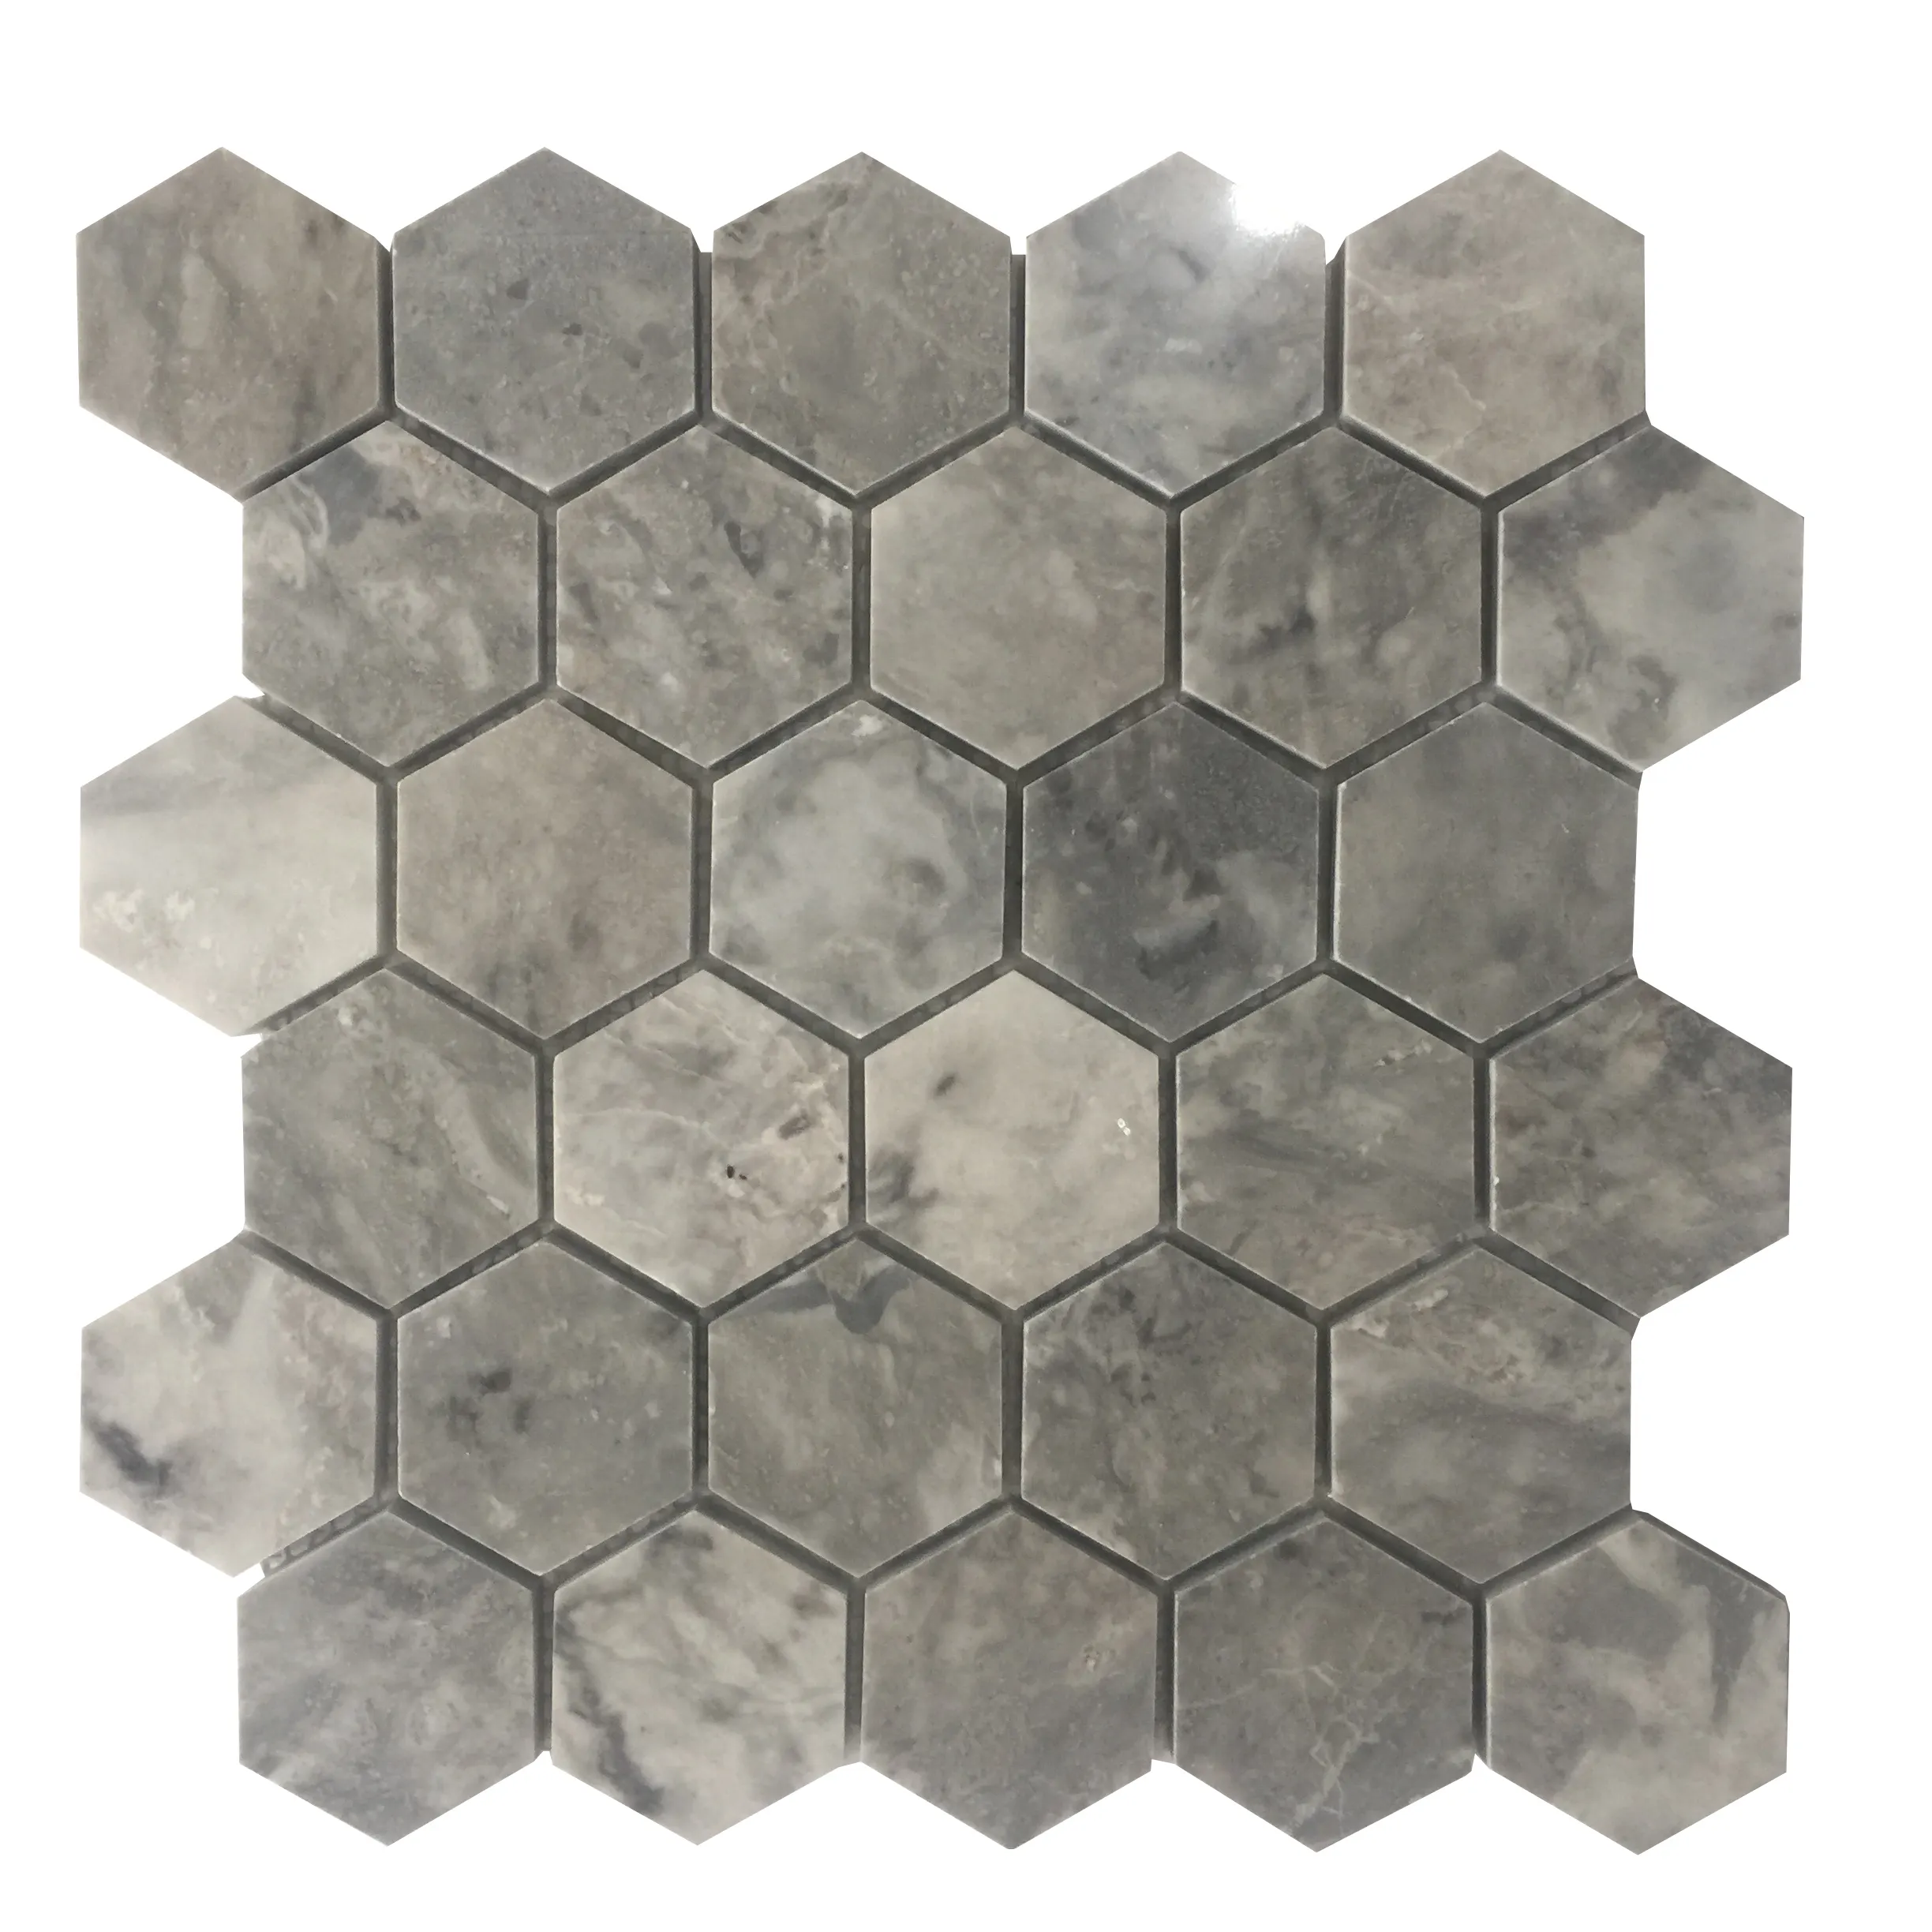 GREY MARBLE STONE MOSAICS HEXAGONAL 2 INCH FOR WALLING AND FLOORING